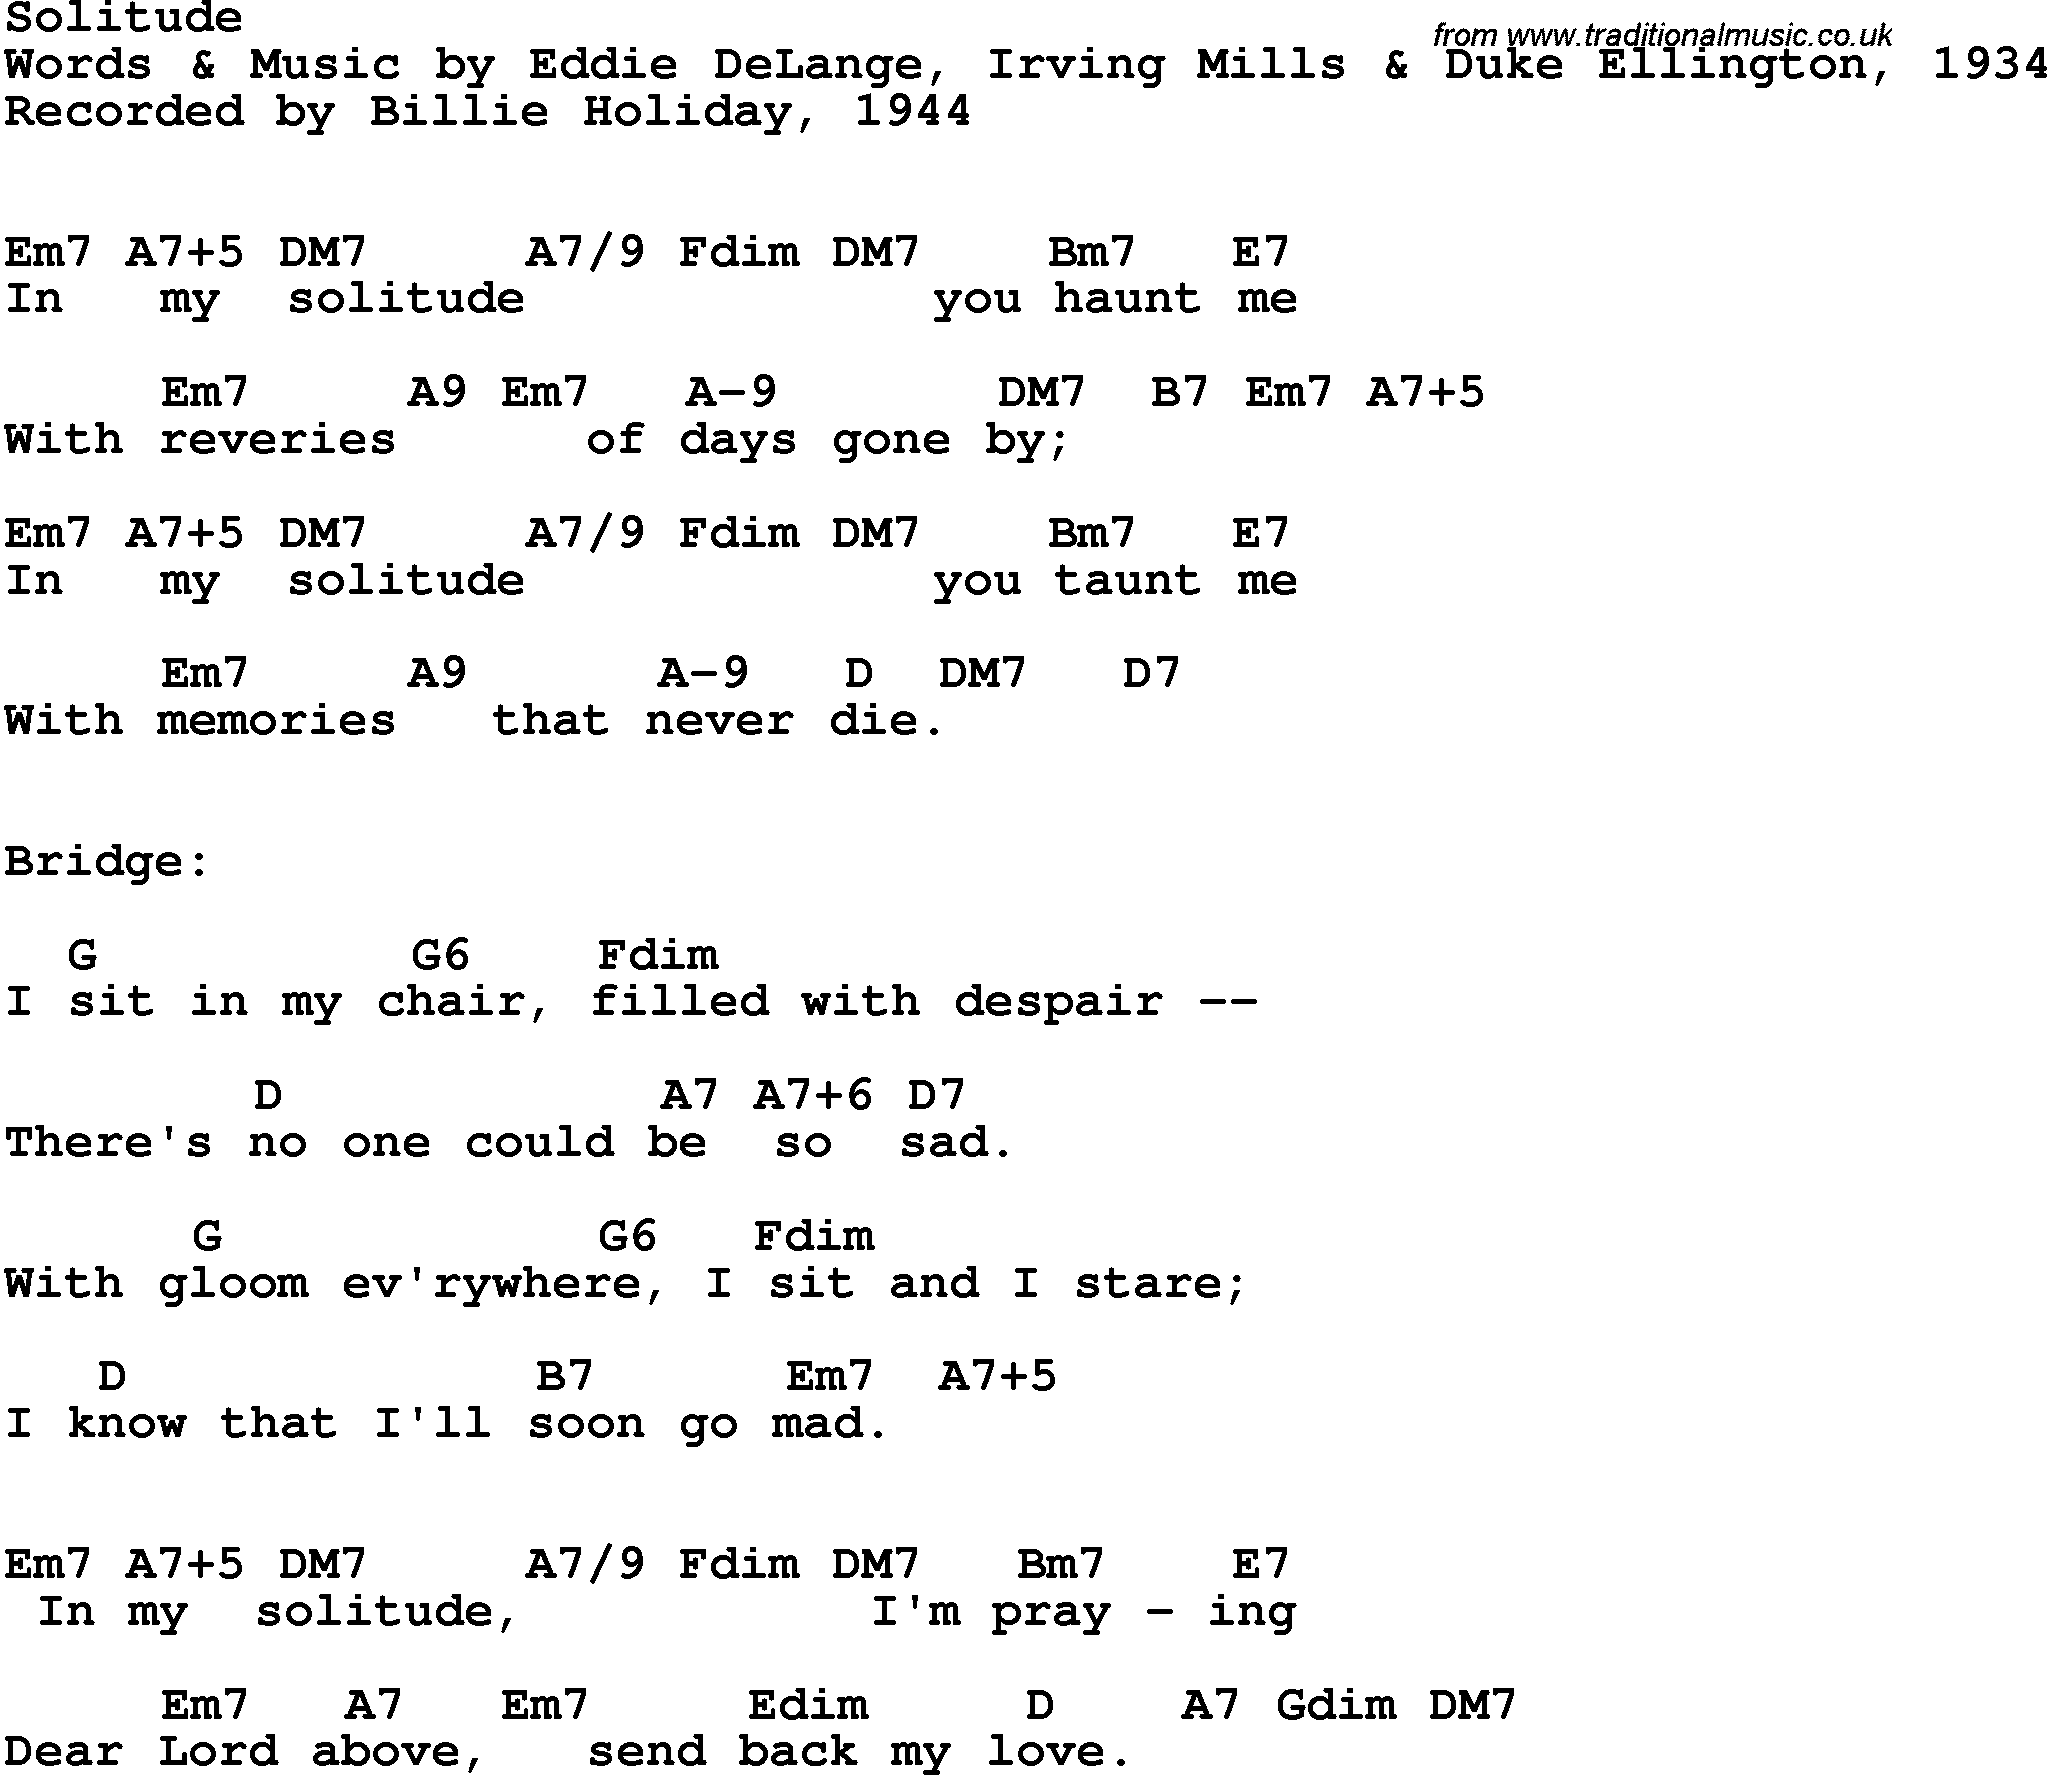 Song Lyrics with guitar chords for Solitude - Billie Holiday, 1944